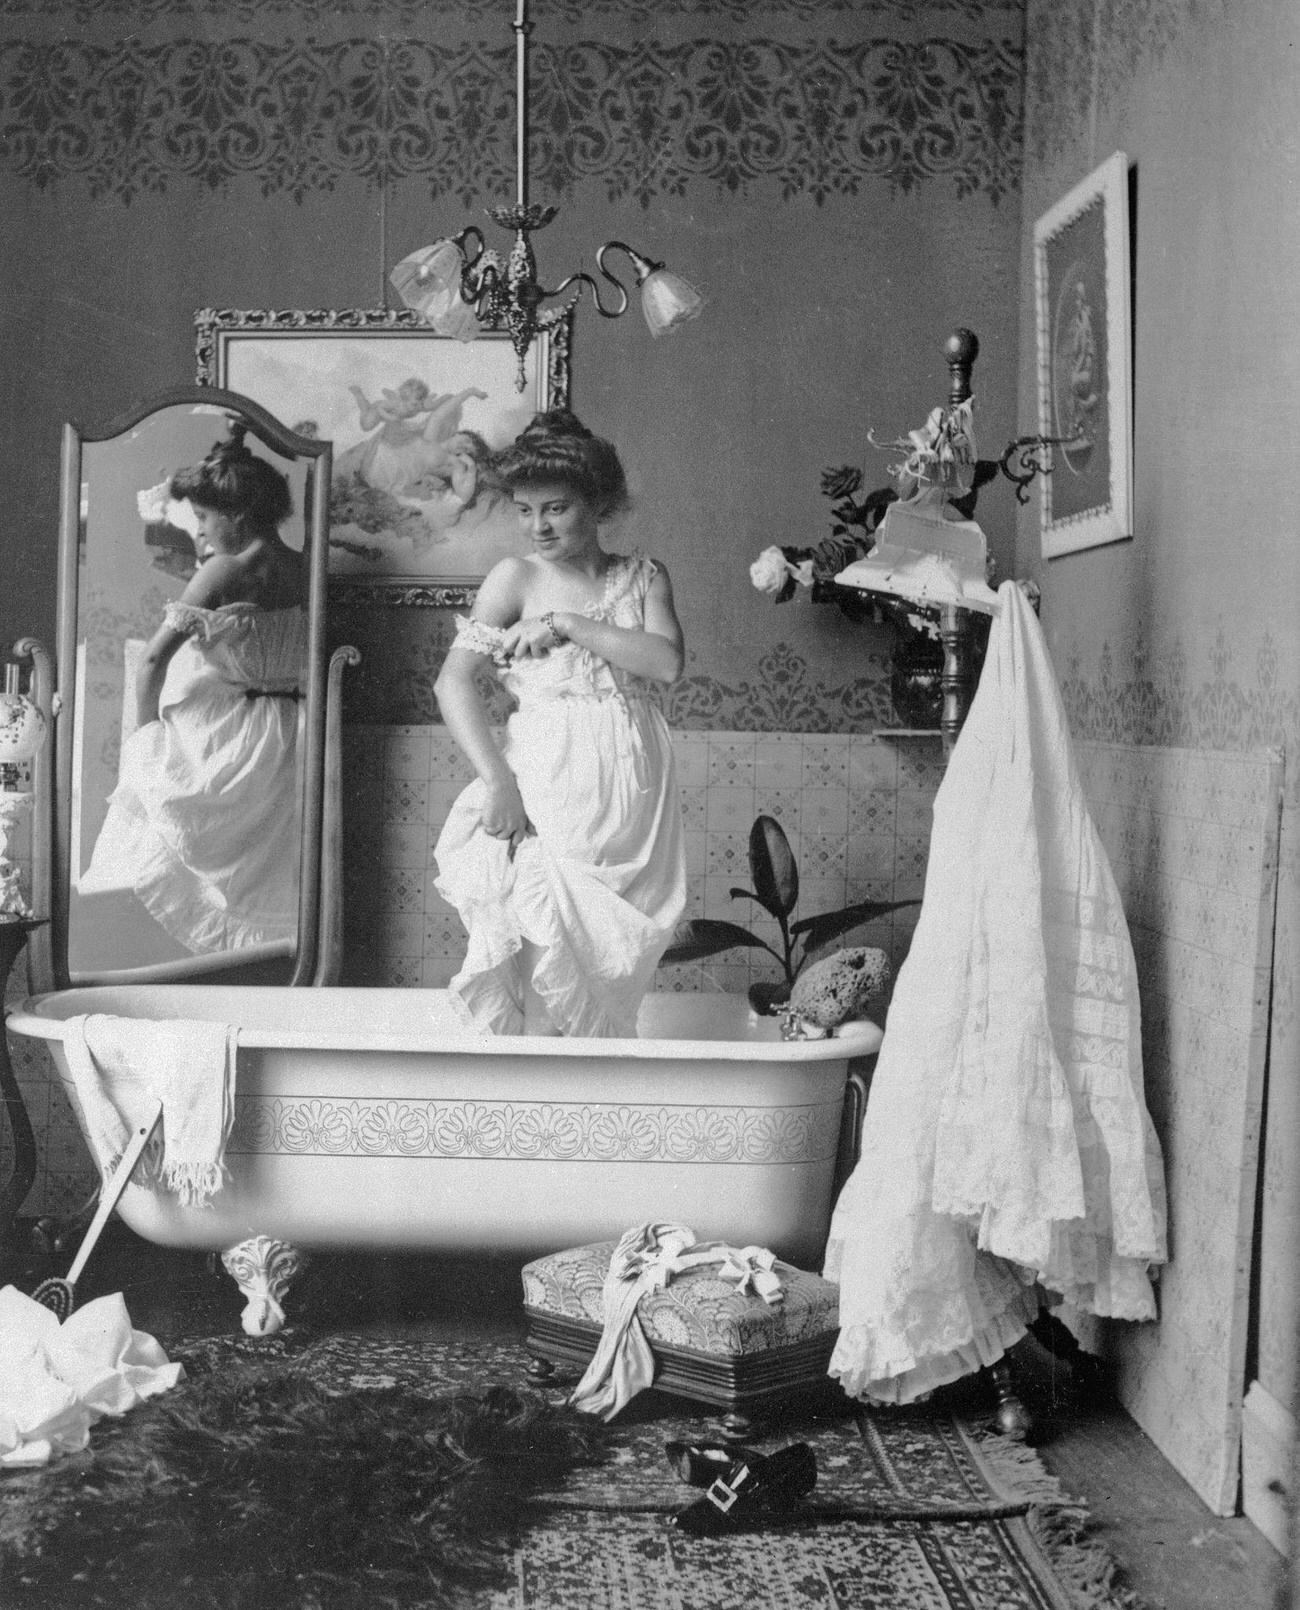 Victorian woman about to bathe, late 19th century.